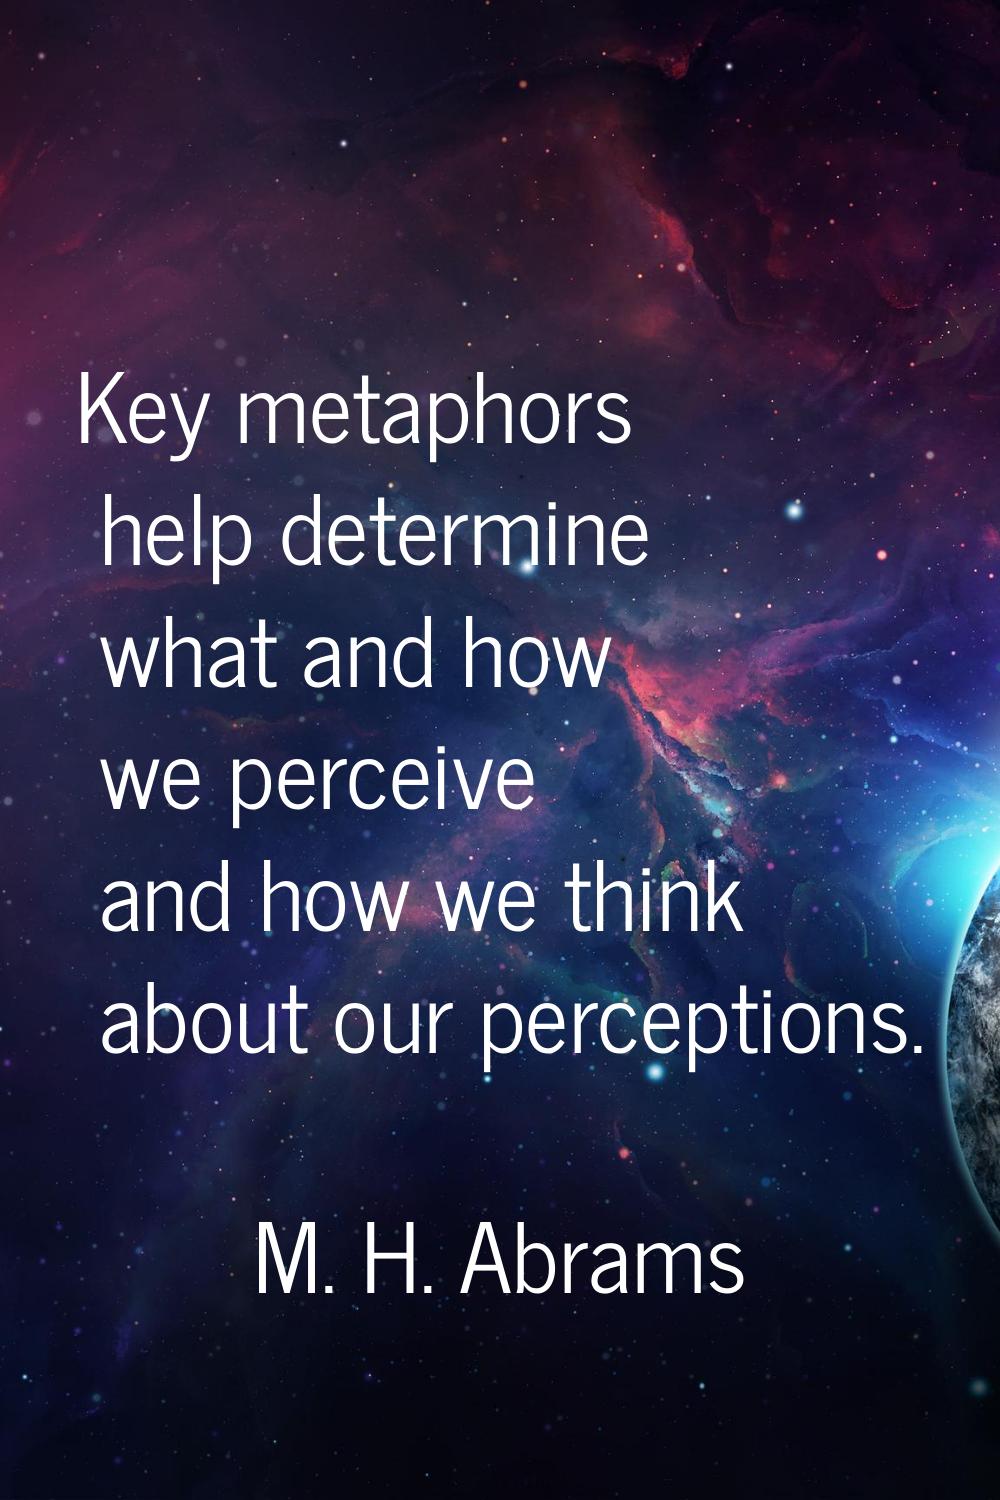 Key metaphors help determine what and how we perceive and how we think about our perceptions.